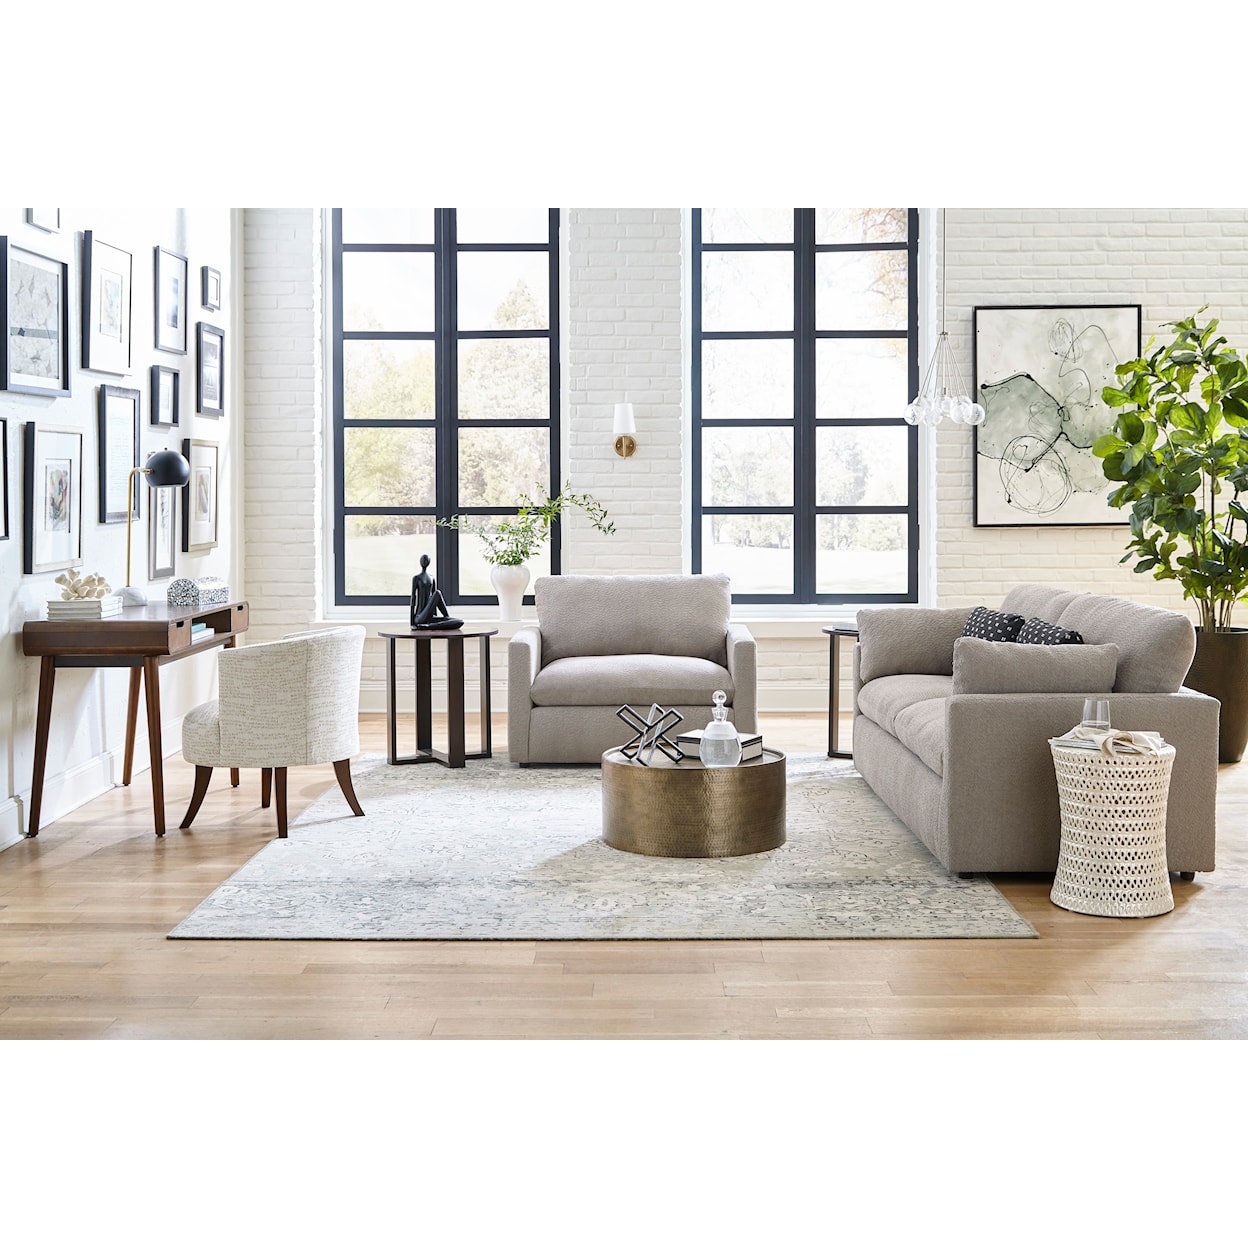 Best Home Furnishings Knumelli Chair